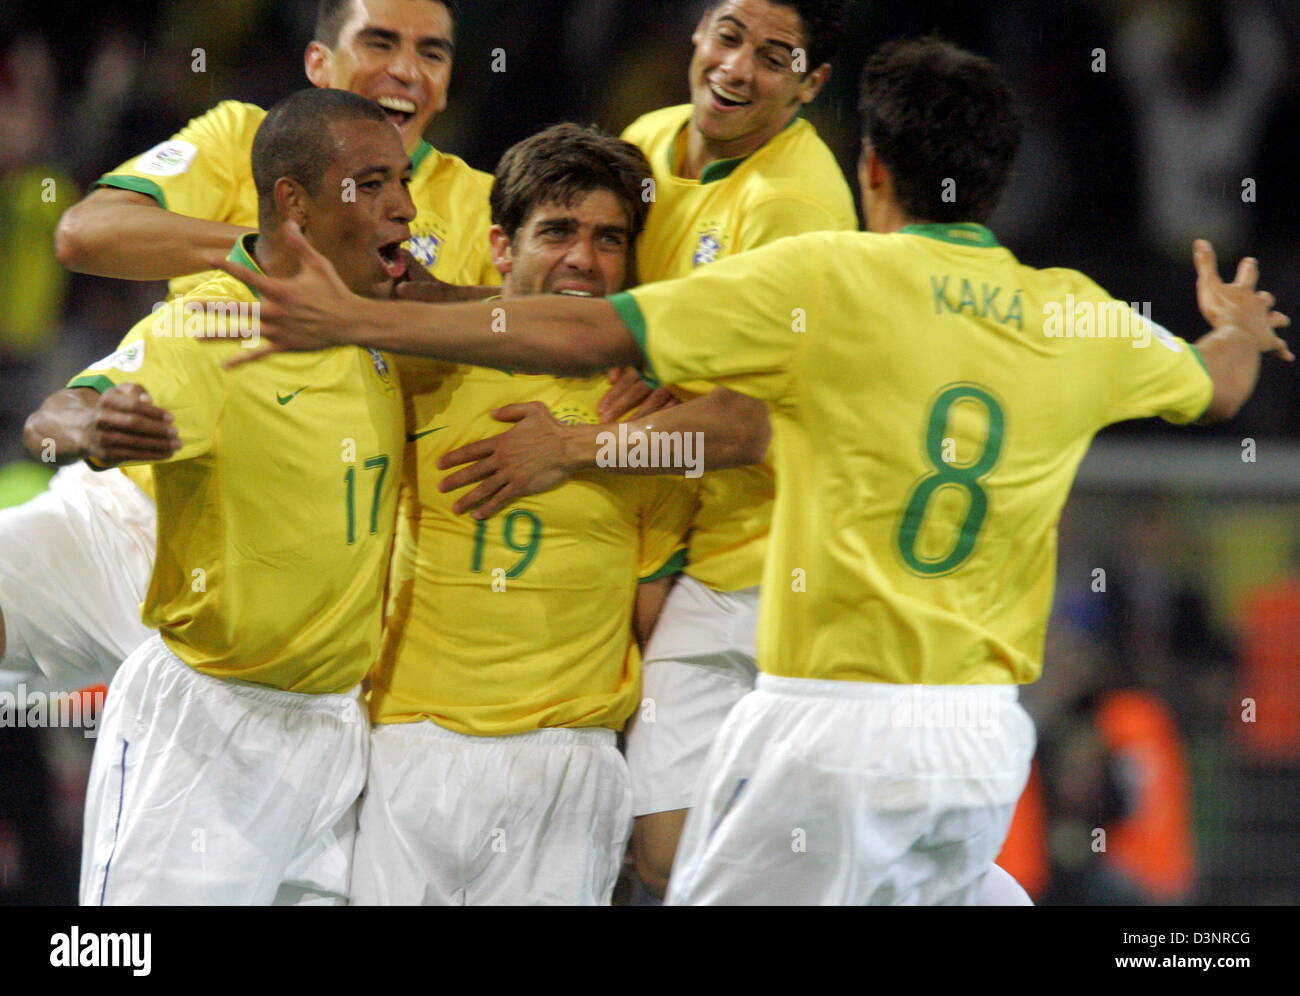 Juninho Pernambucano (C) from Brazil is celebrated by teammates Gilberto Silva (L-R) Lucio, Cicinho and Kaka after scoring the 2-1 lead against Japan during the group F match of 2006 FIFA World Cup between Japan and Brazil in Dortmund, Germany, Thursday 22 June 2006. DPA/BERND THISSEN +++ Mobile Services OUT +++ Please refer to FIFA's Terms and Conditions. Stock Photo